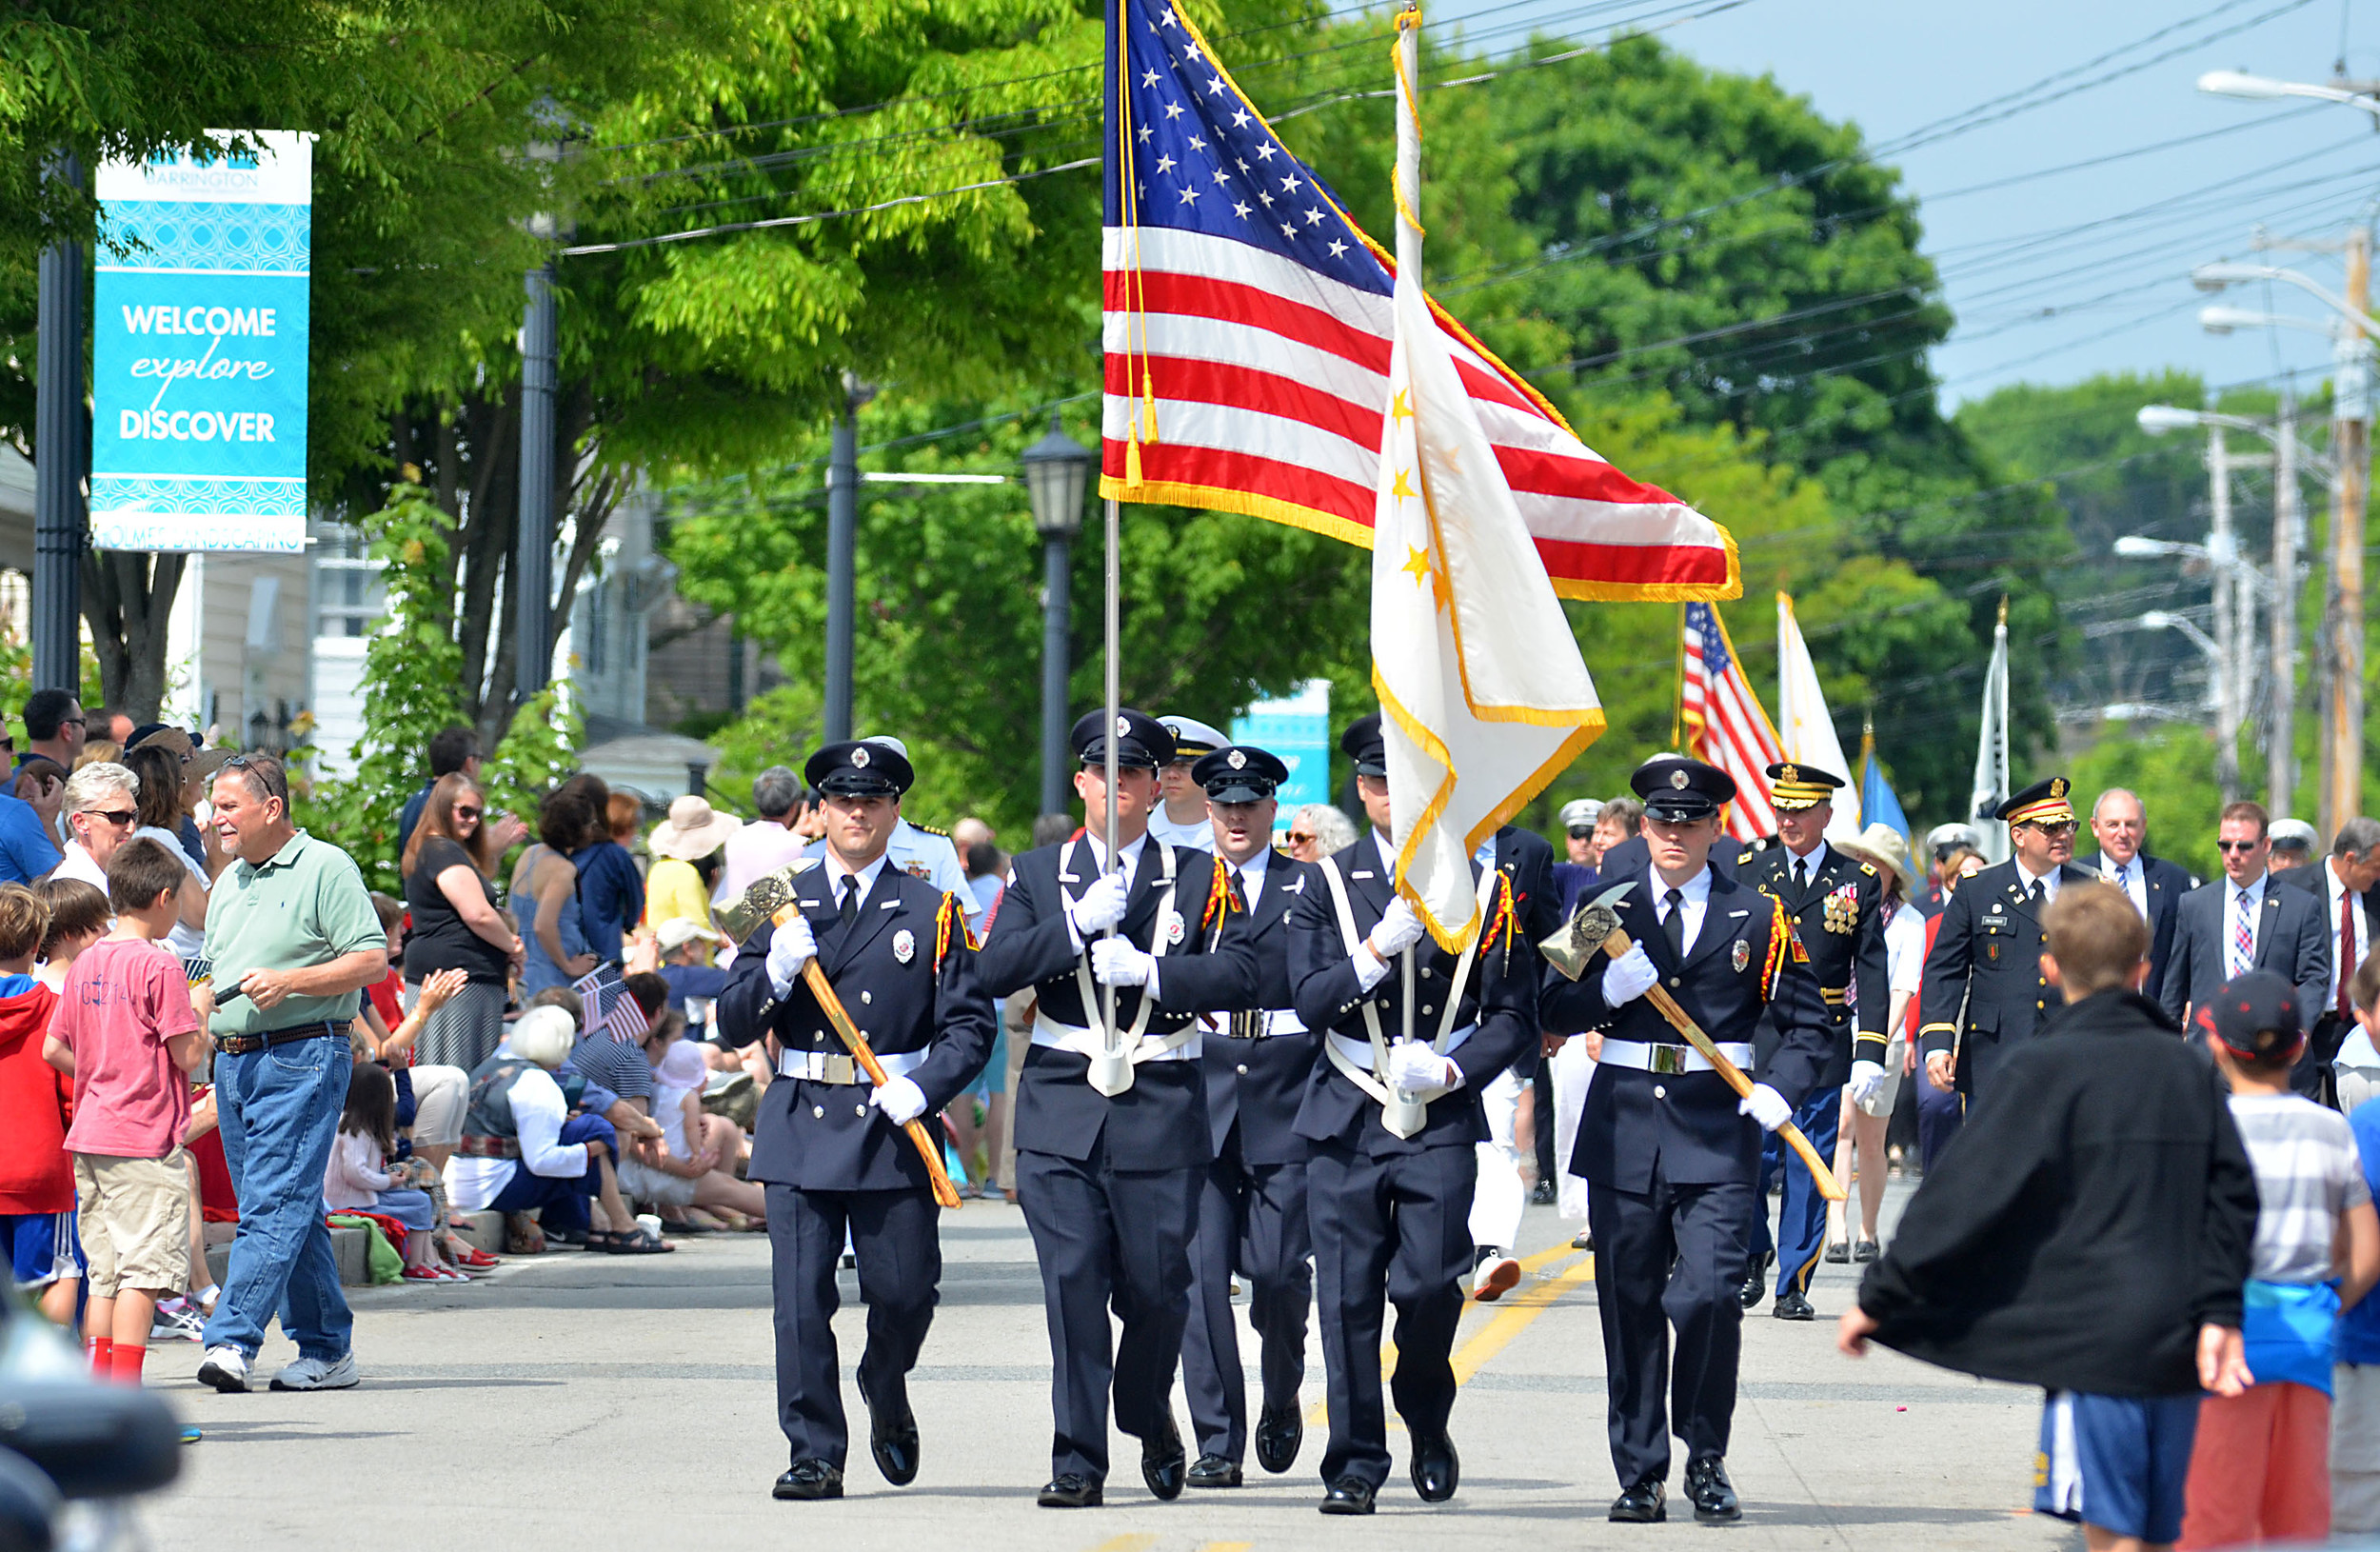 Members of the Barrington Fire Department honor guard march during a recent Memorial Day parade in Barrington.